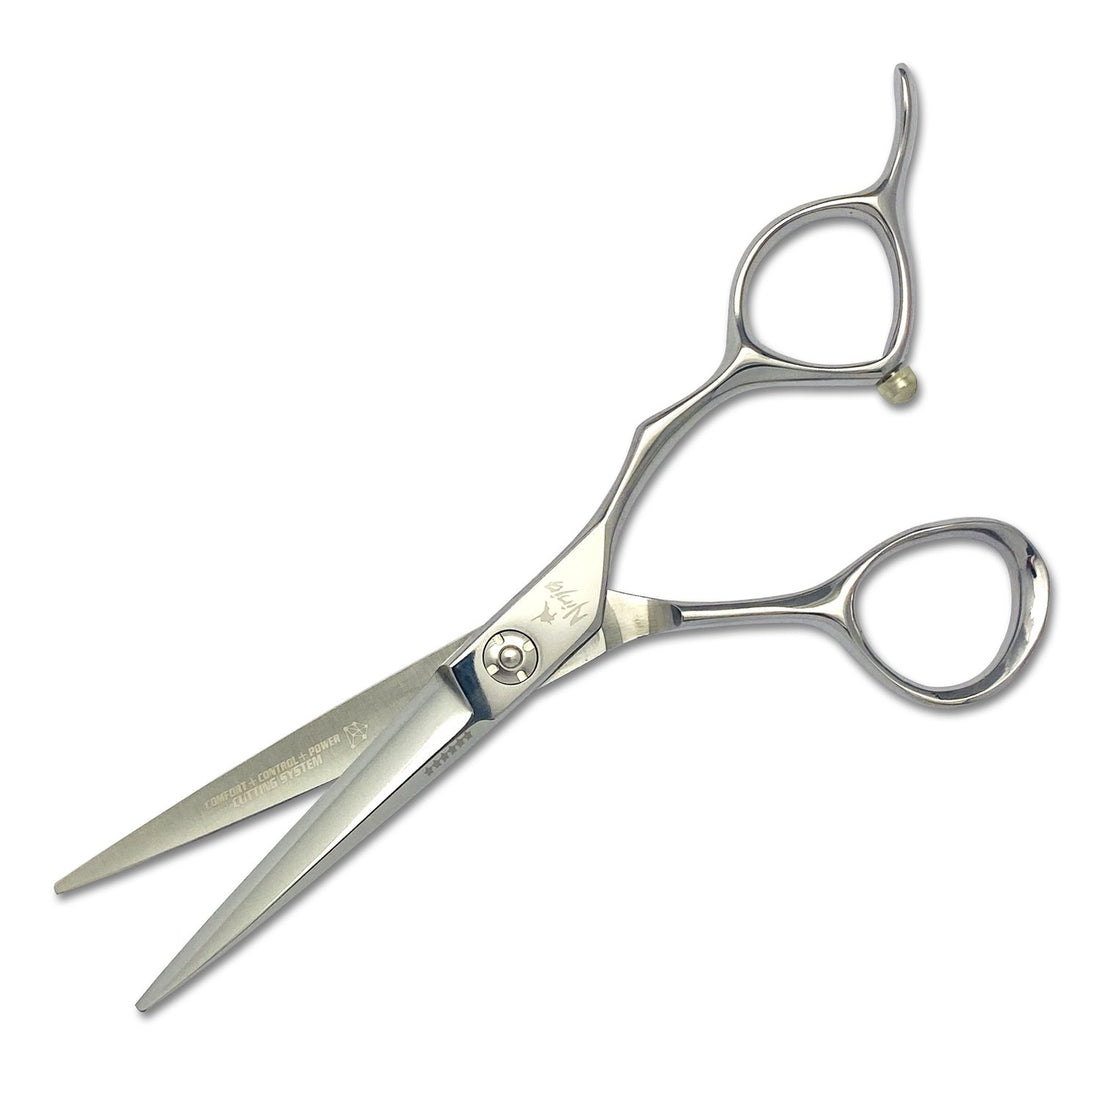 How often should you sharpen your shears?